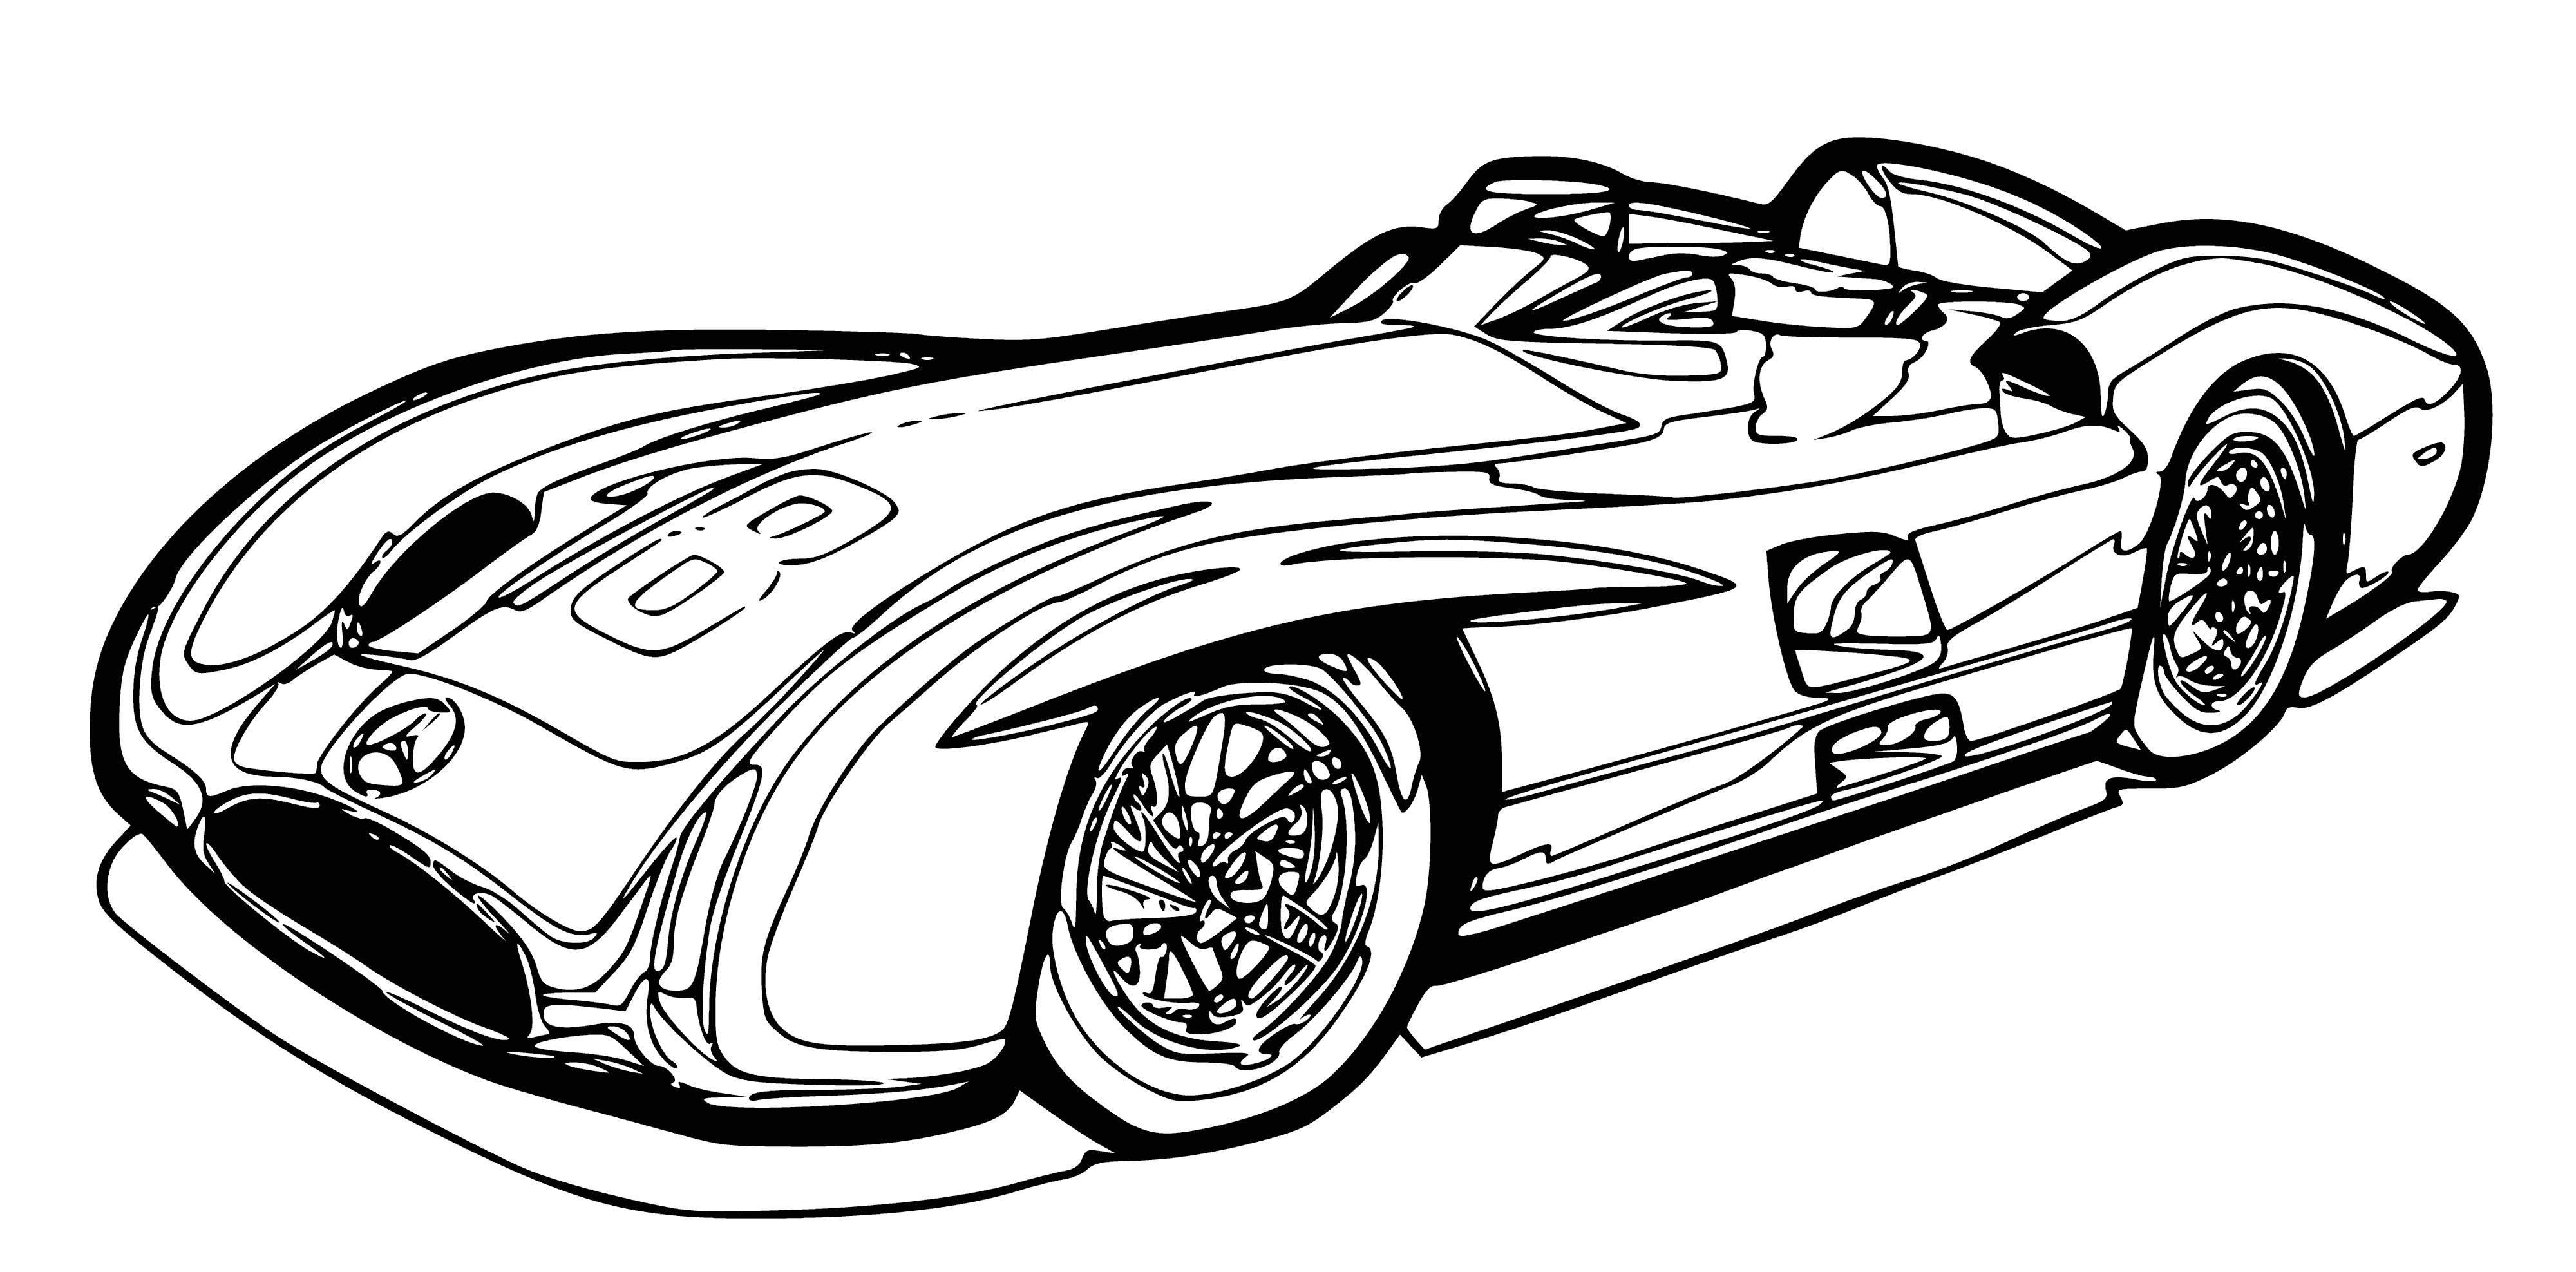 coloring page: Racers in a 1950s car, driver in a helmet, passenger without—both concentrating and racing fast.